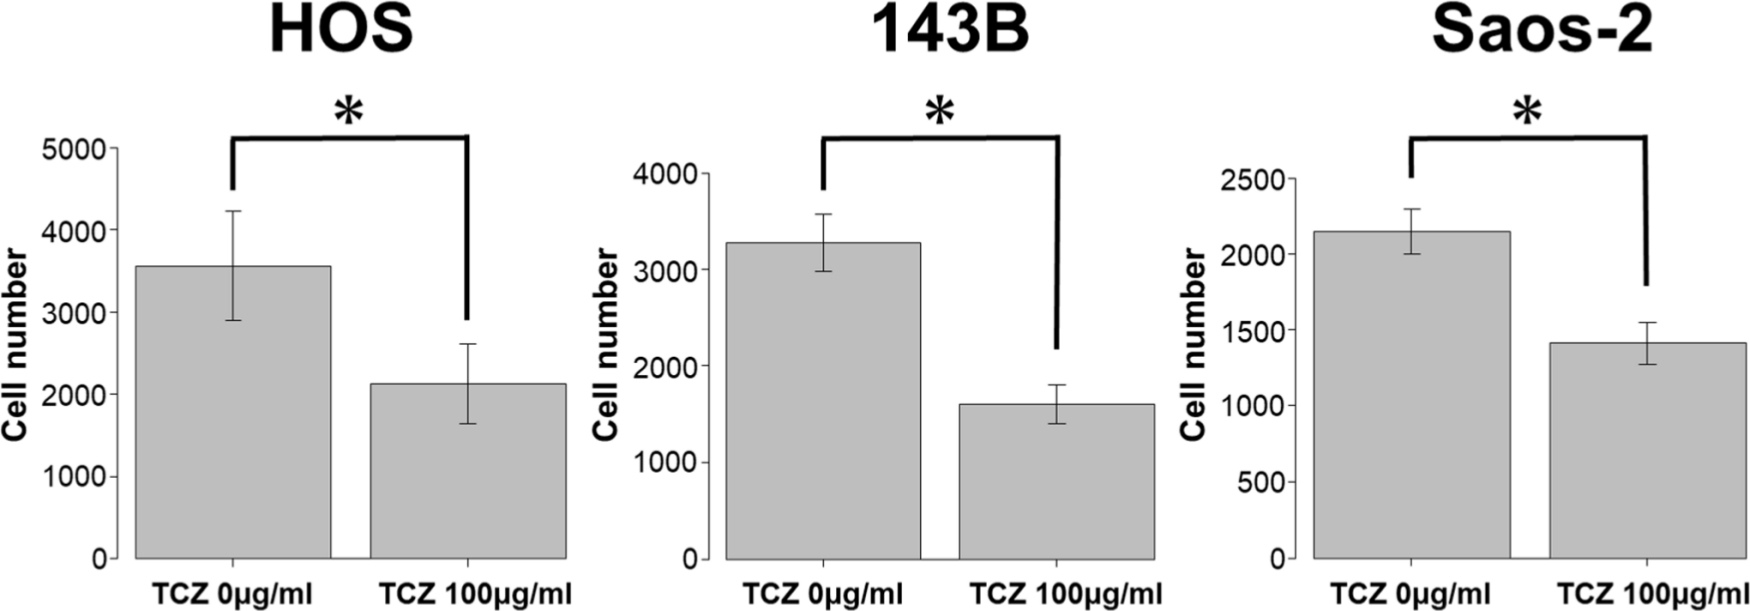 Fig. 8 
            Effect of tocilizumab (TCZ) treatment on invasion of 143B, HOS, and Saos-2 cells. *p < 0.001, Mann-Whitney U test.
          